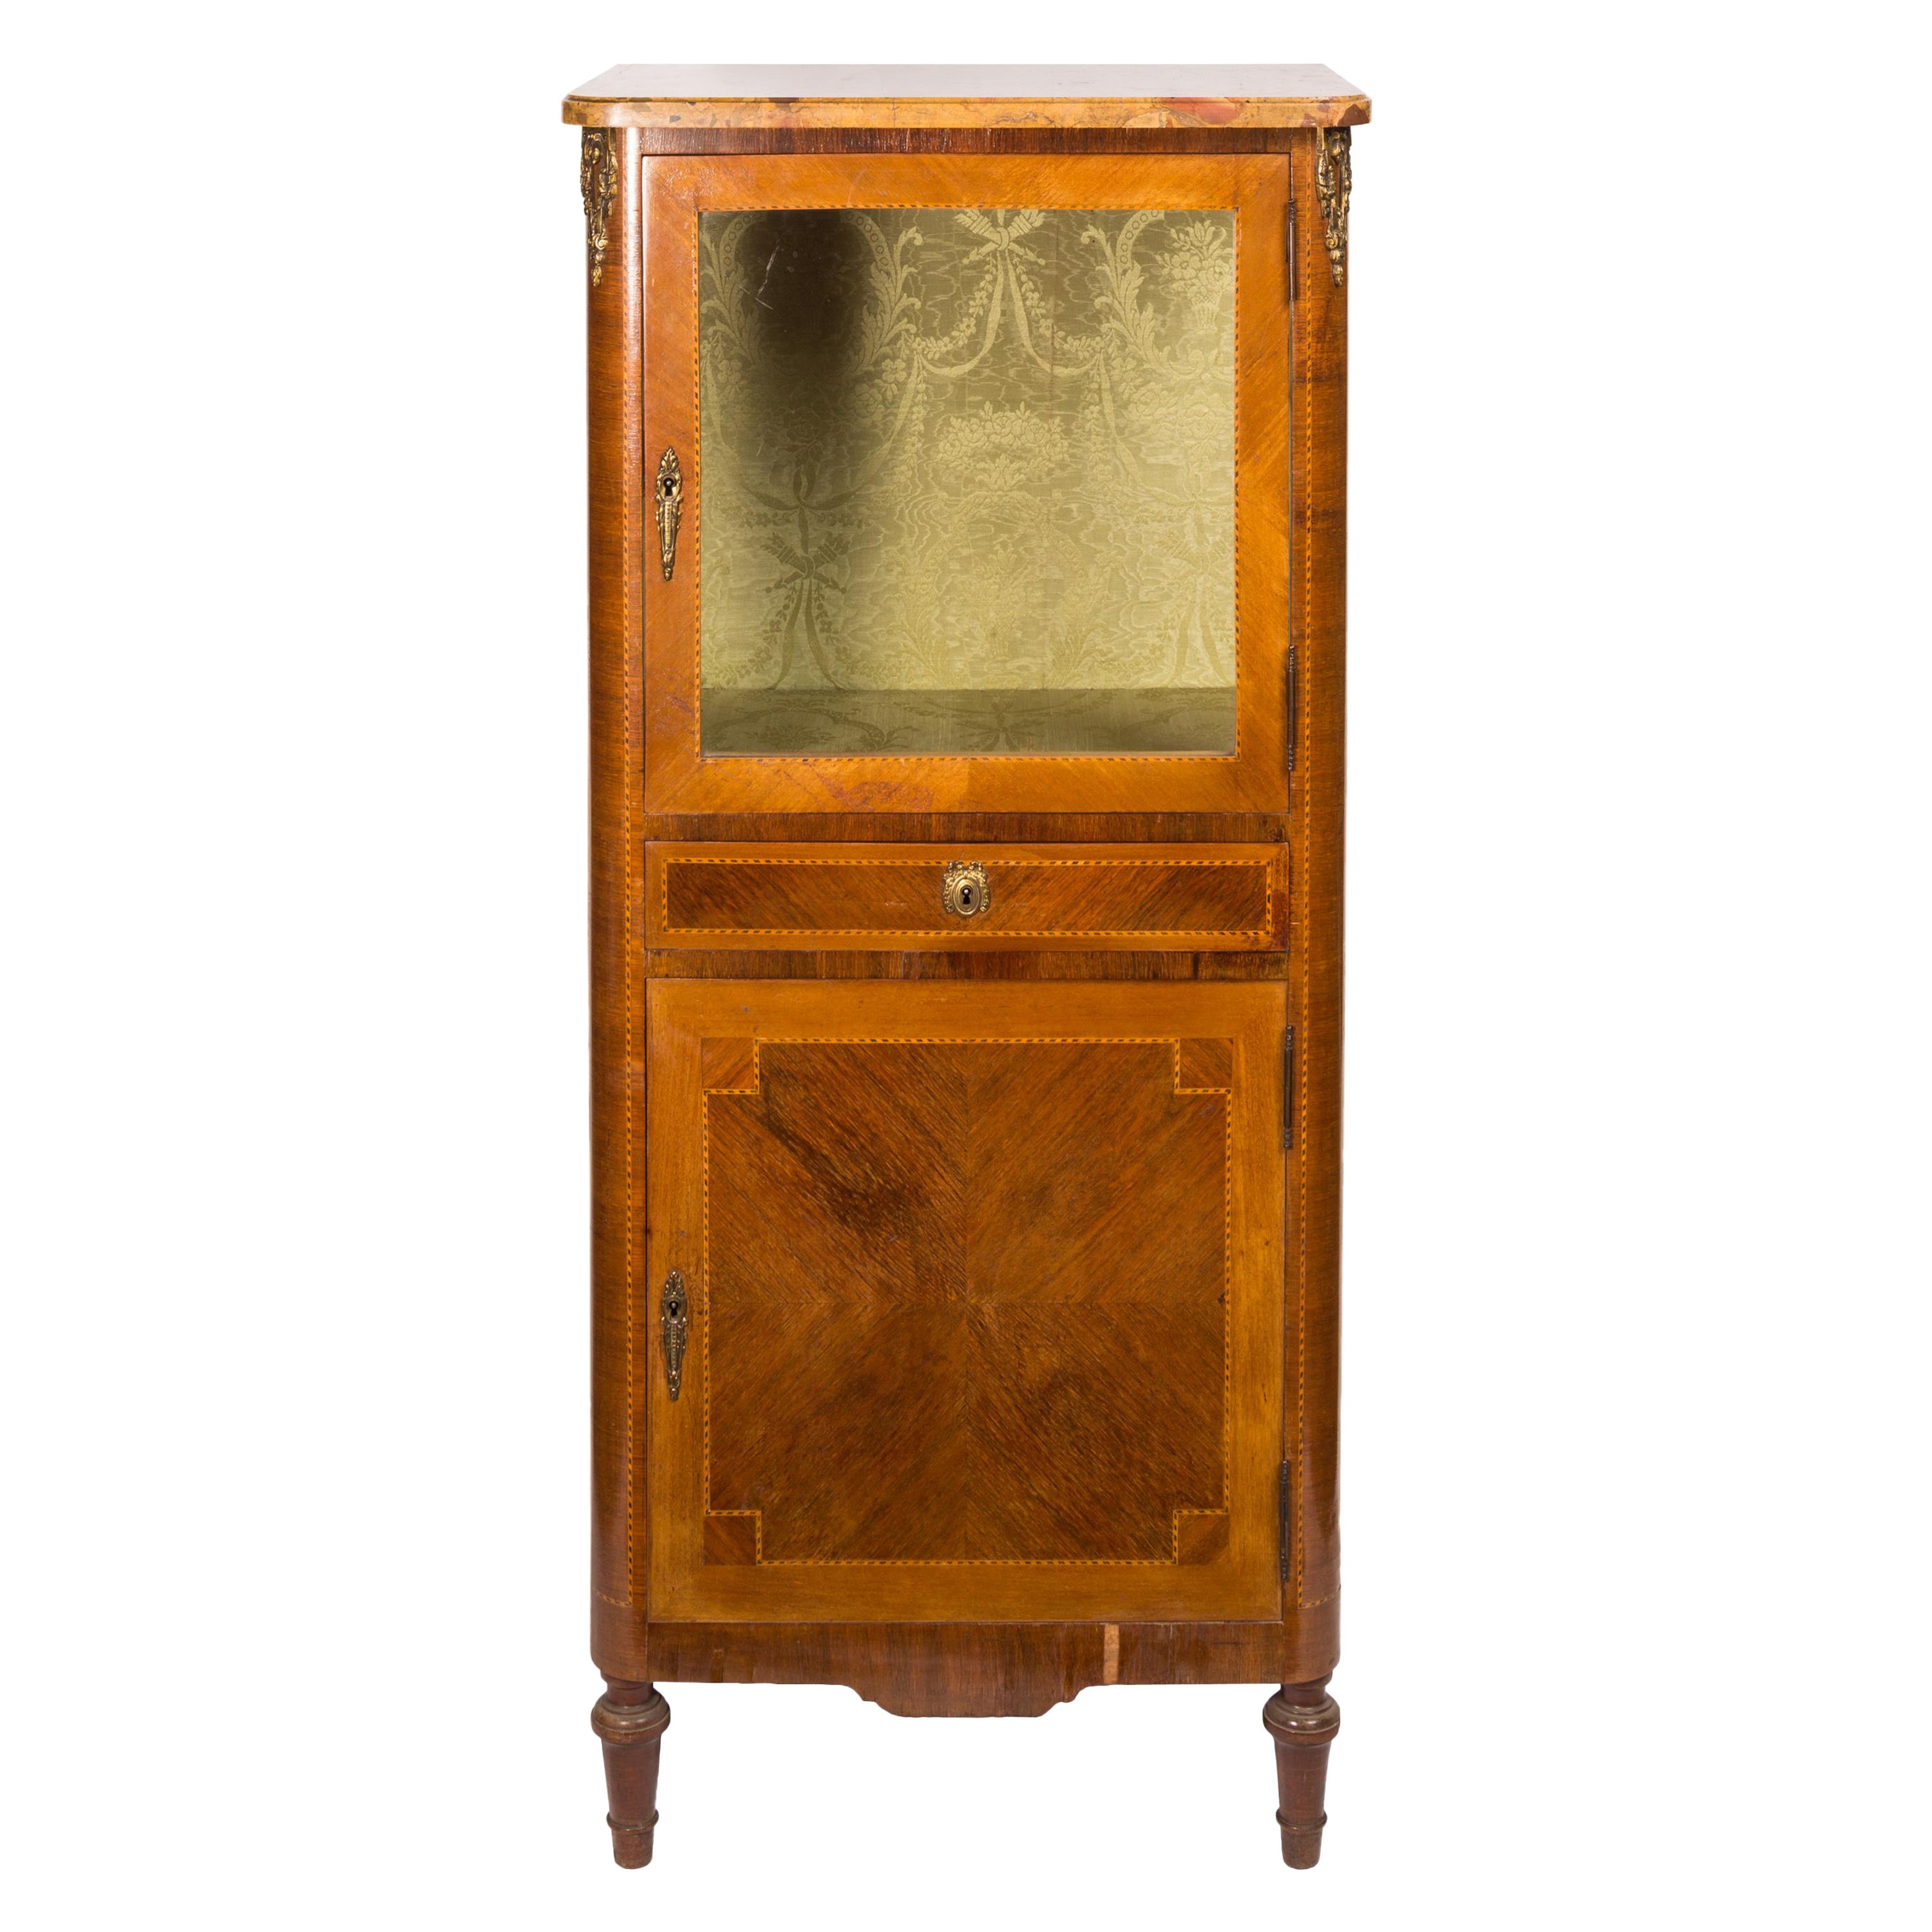 Small Louis XVI Style Vitrine with Marquetry, Ormolu Hardware and Marble Top